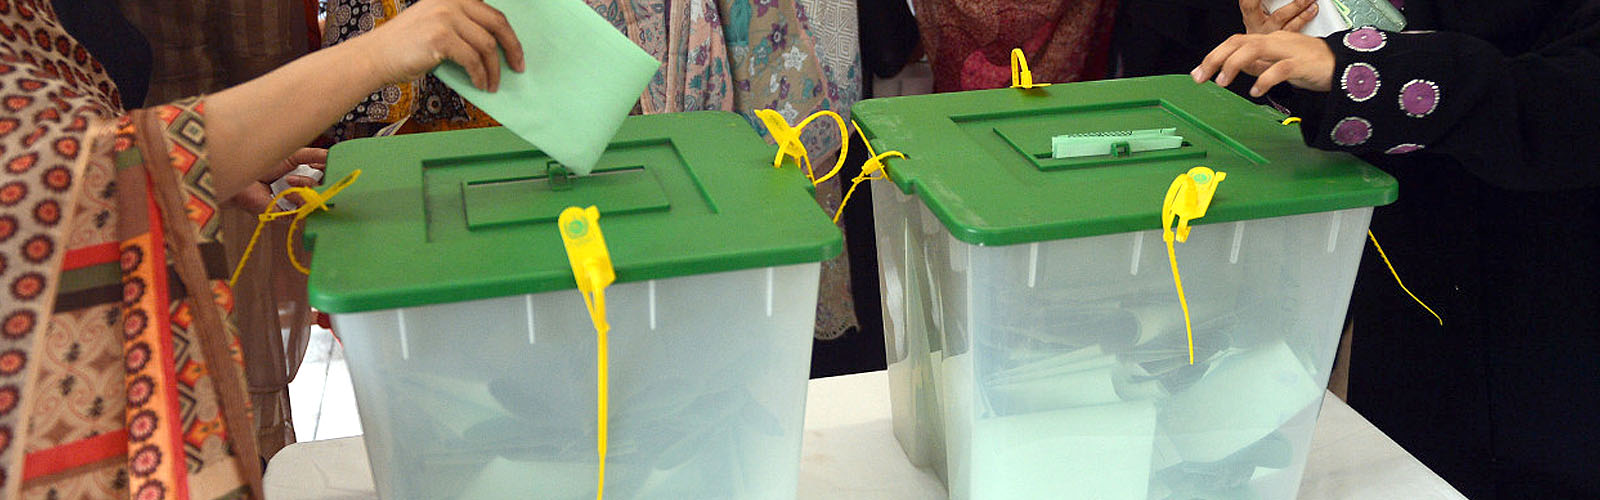 Elections exclusive: How will Pakistan vote?